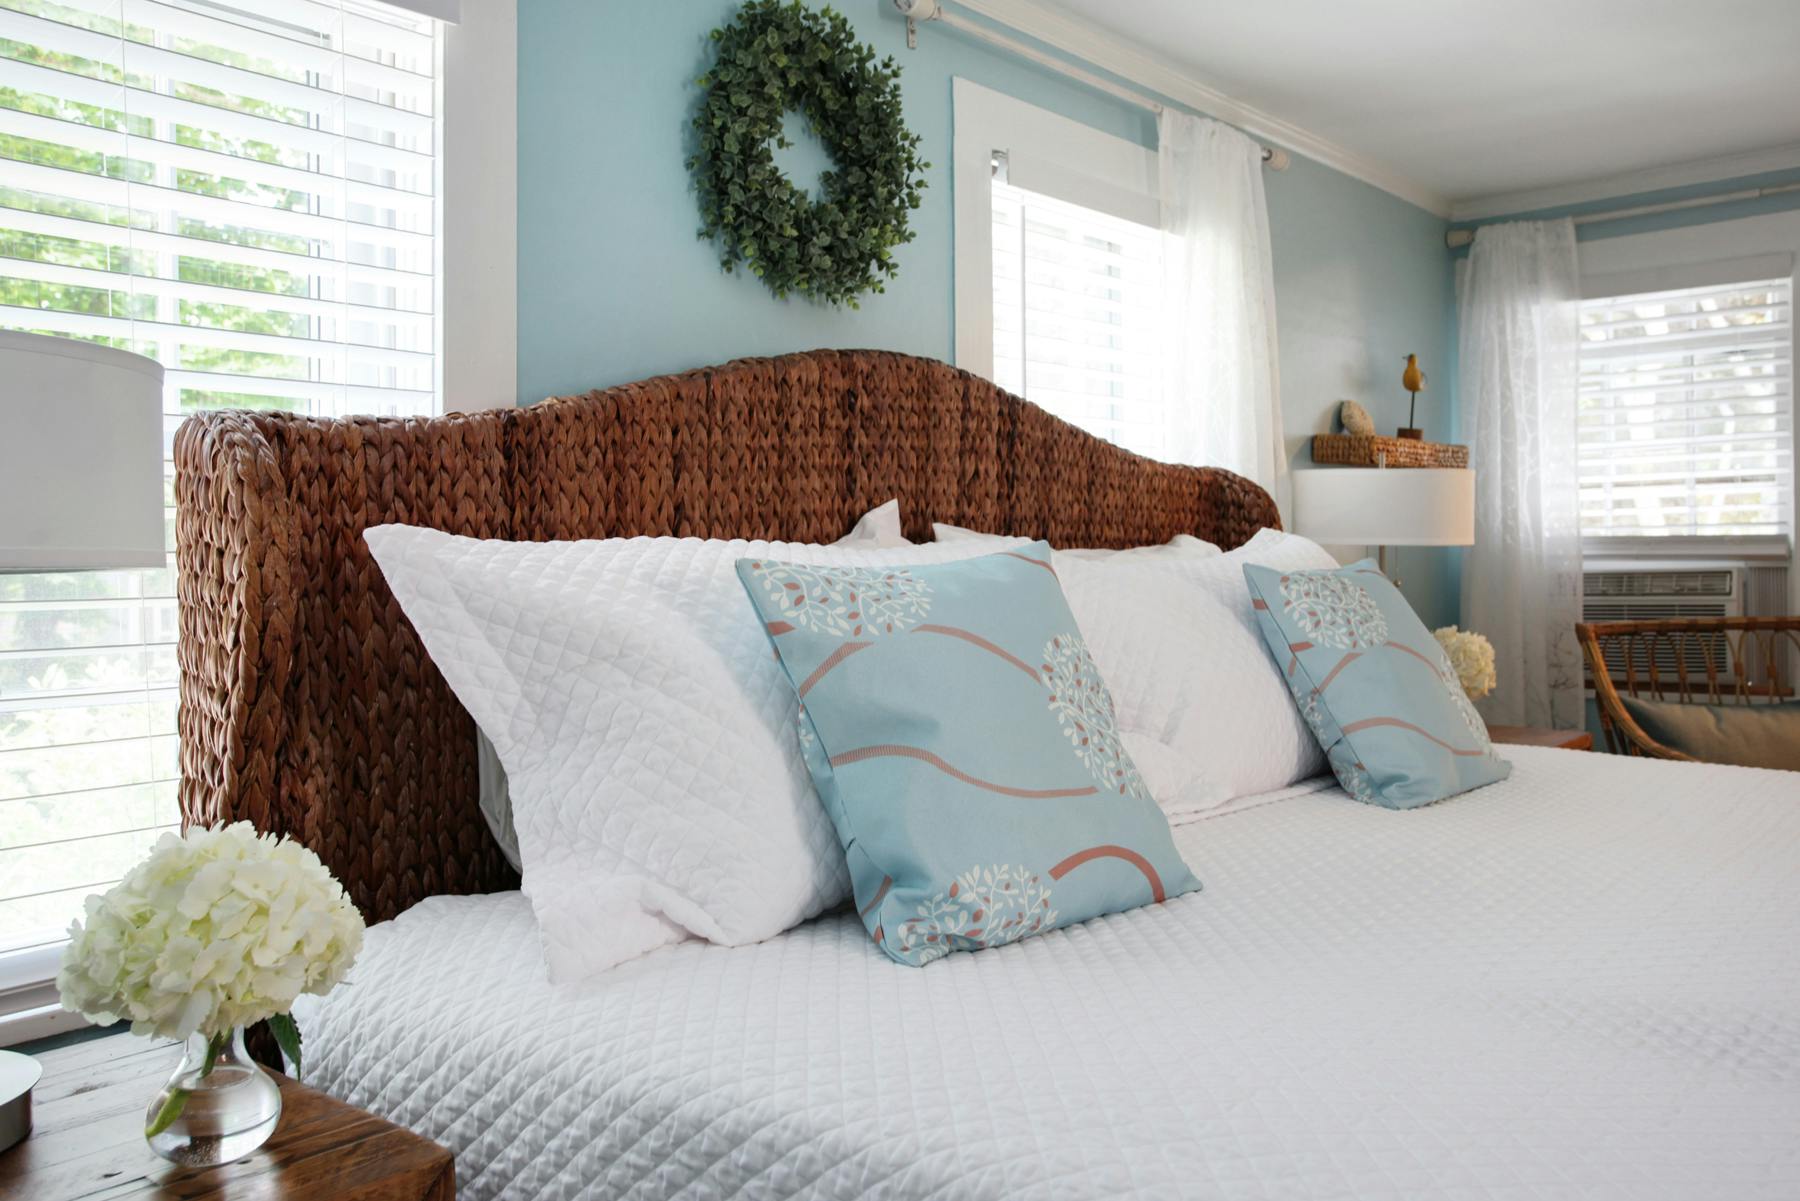 Close up of king bed with rattan headboard, white quilted bedcover and decorative throw pillows